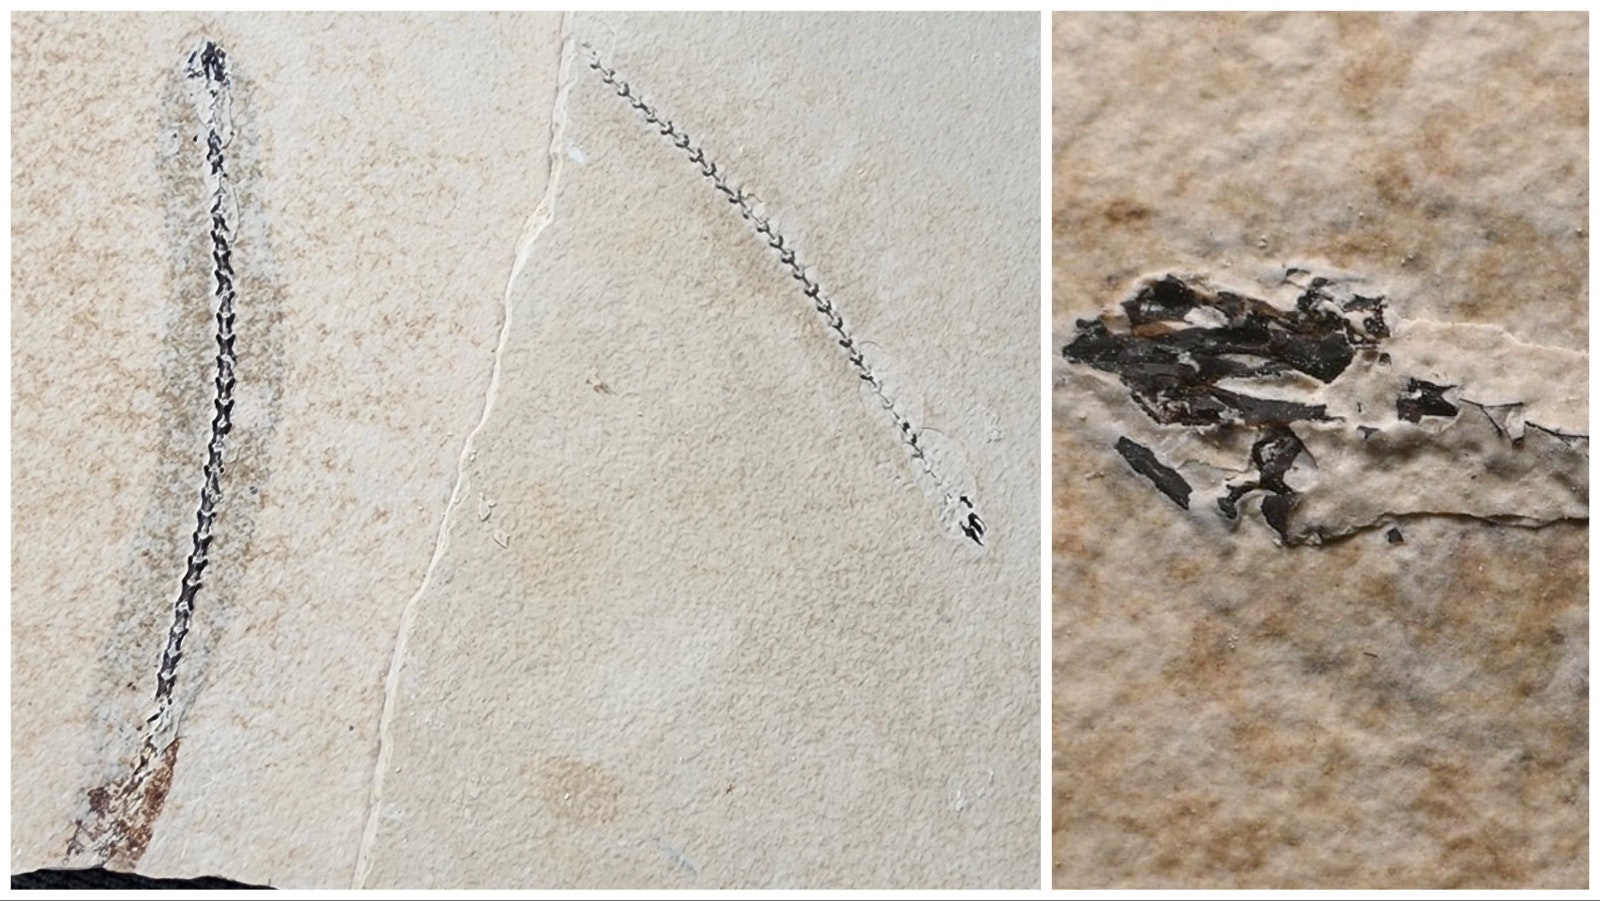 Left: The thin slabs of rock containing the nearly complete skeleton of the foot-long salamander found near Kemmerer. It will take hundreds of hours of preparation before the fossil is ready for display in a Wyoming museum. Right: The partially exposed skull of the salamander. This fossil has been tentatively identified as a Paleoamphiuma, making it only the third specimen of the extinct omnivorous salamander ever found in the Green River Formation.